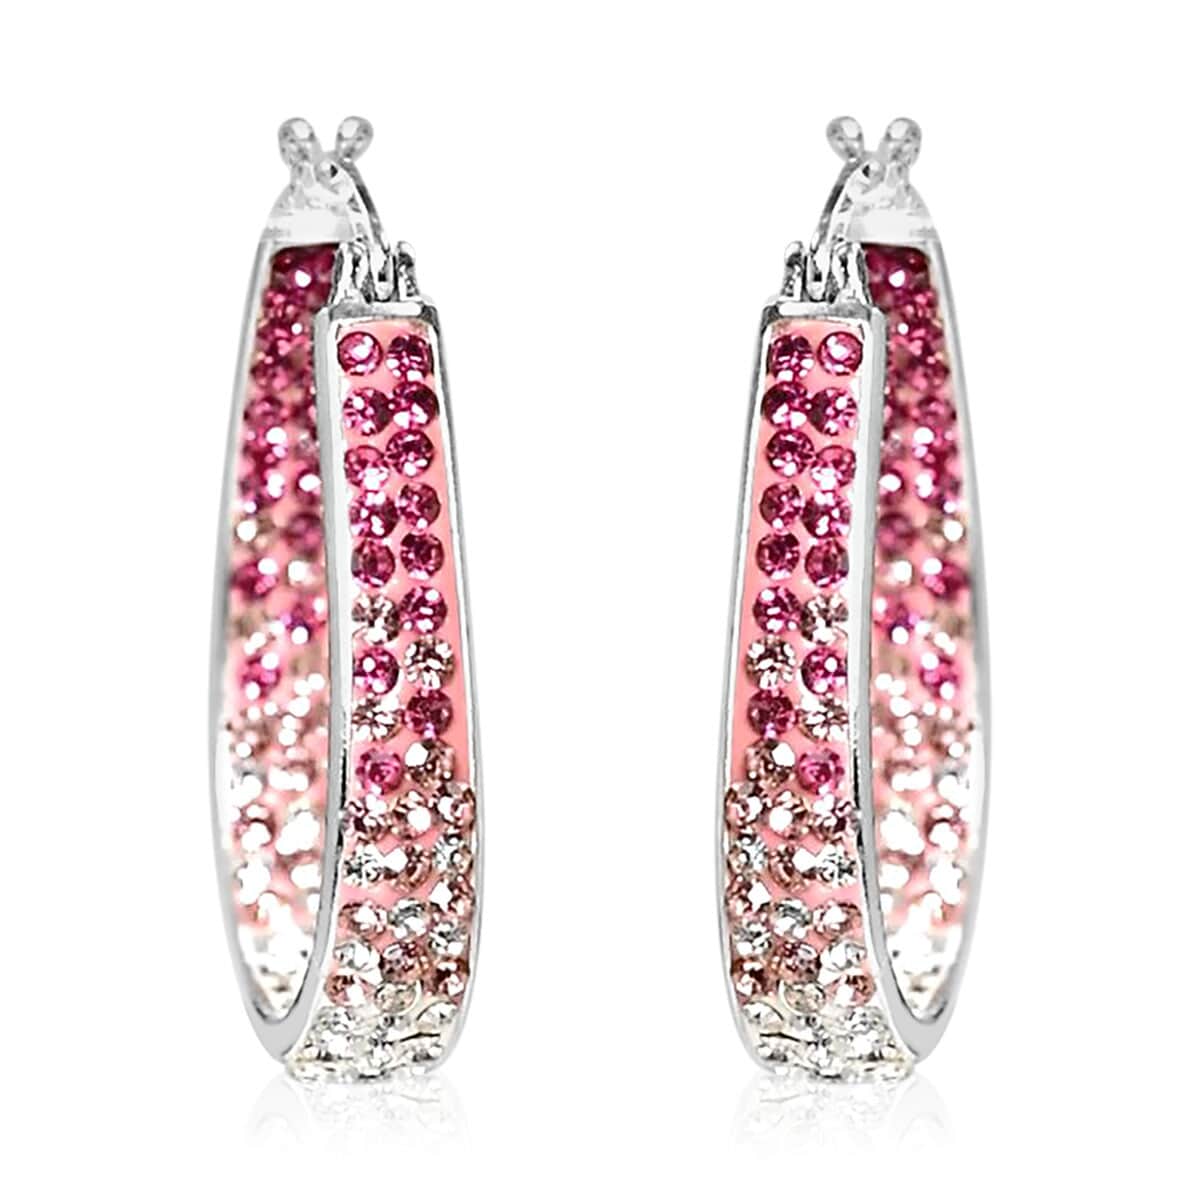 Austrian White Crystal Pink Crystal Earrings in Silvertone, Inside Out Hoops For Women image number 0